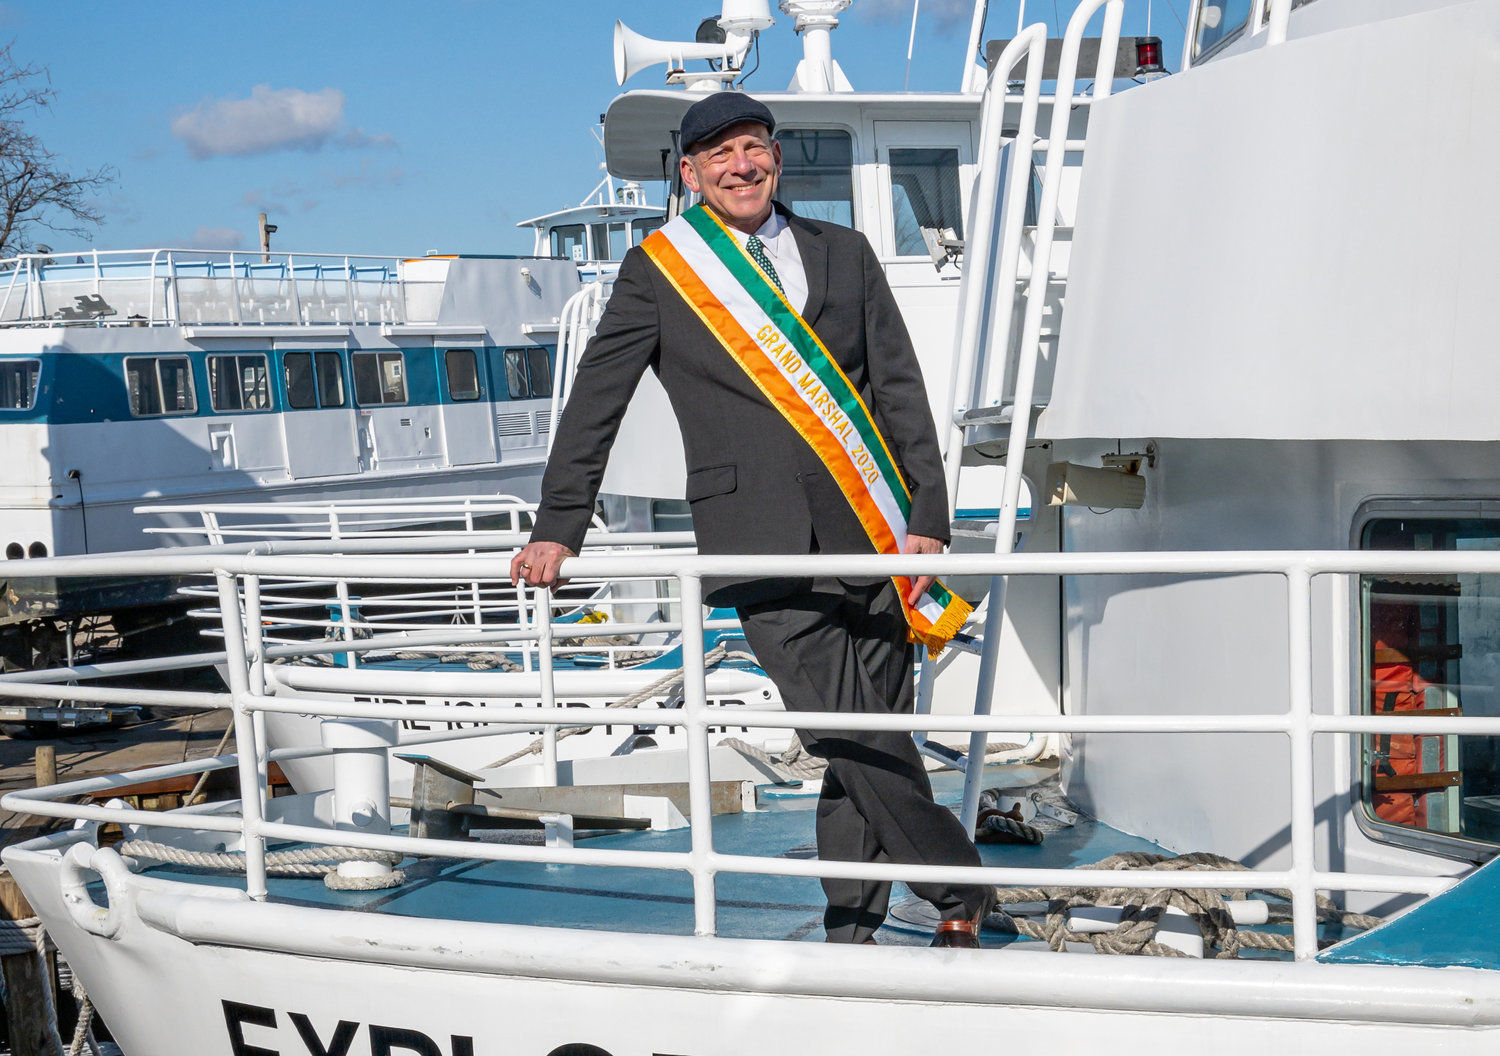 Tim Mooney, president of Fire Island Ferries, is the grand marshal of the Bay Shore St. Patrick’s Day parade.